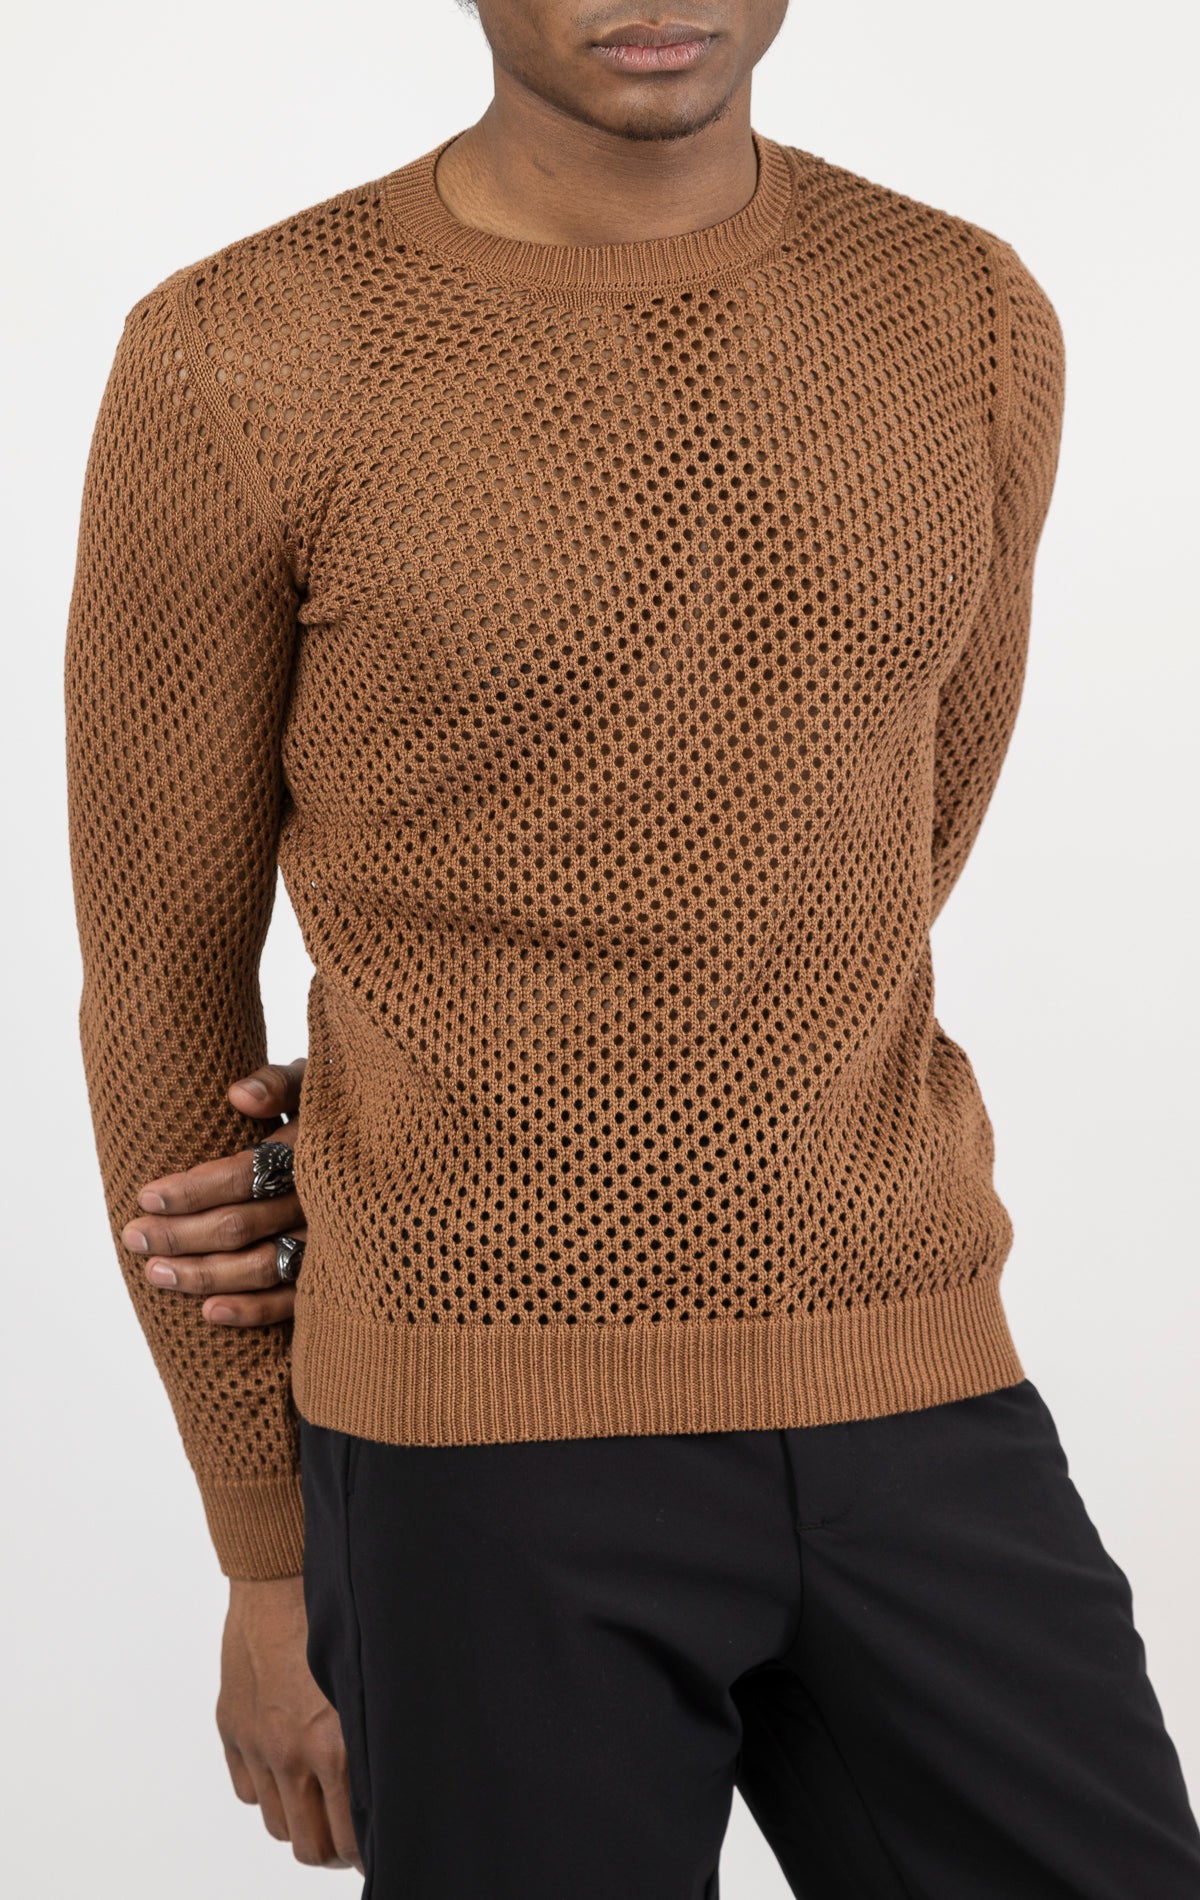 Men's see-through fishnet muscle fit shirt in brown. The shirt is made from a 50% cotton, 50% acrylic blend and features a muscle fit silhouette with a see-through fishnet fabric design.